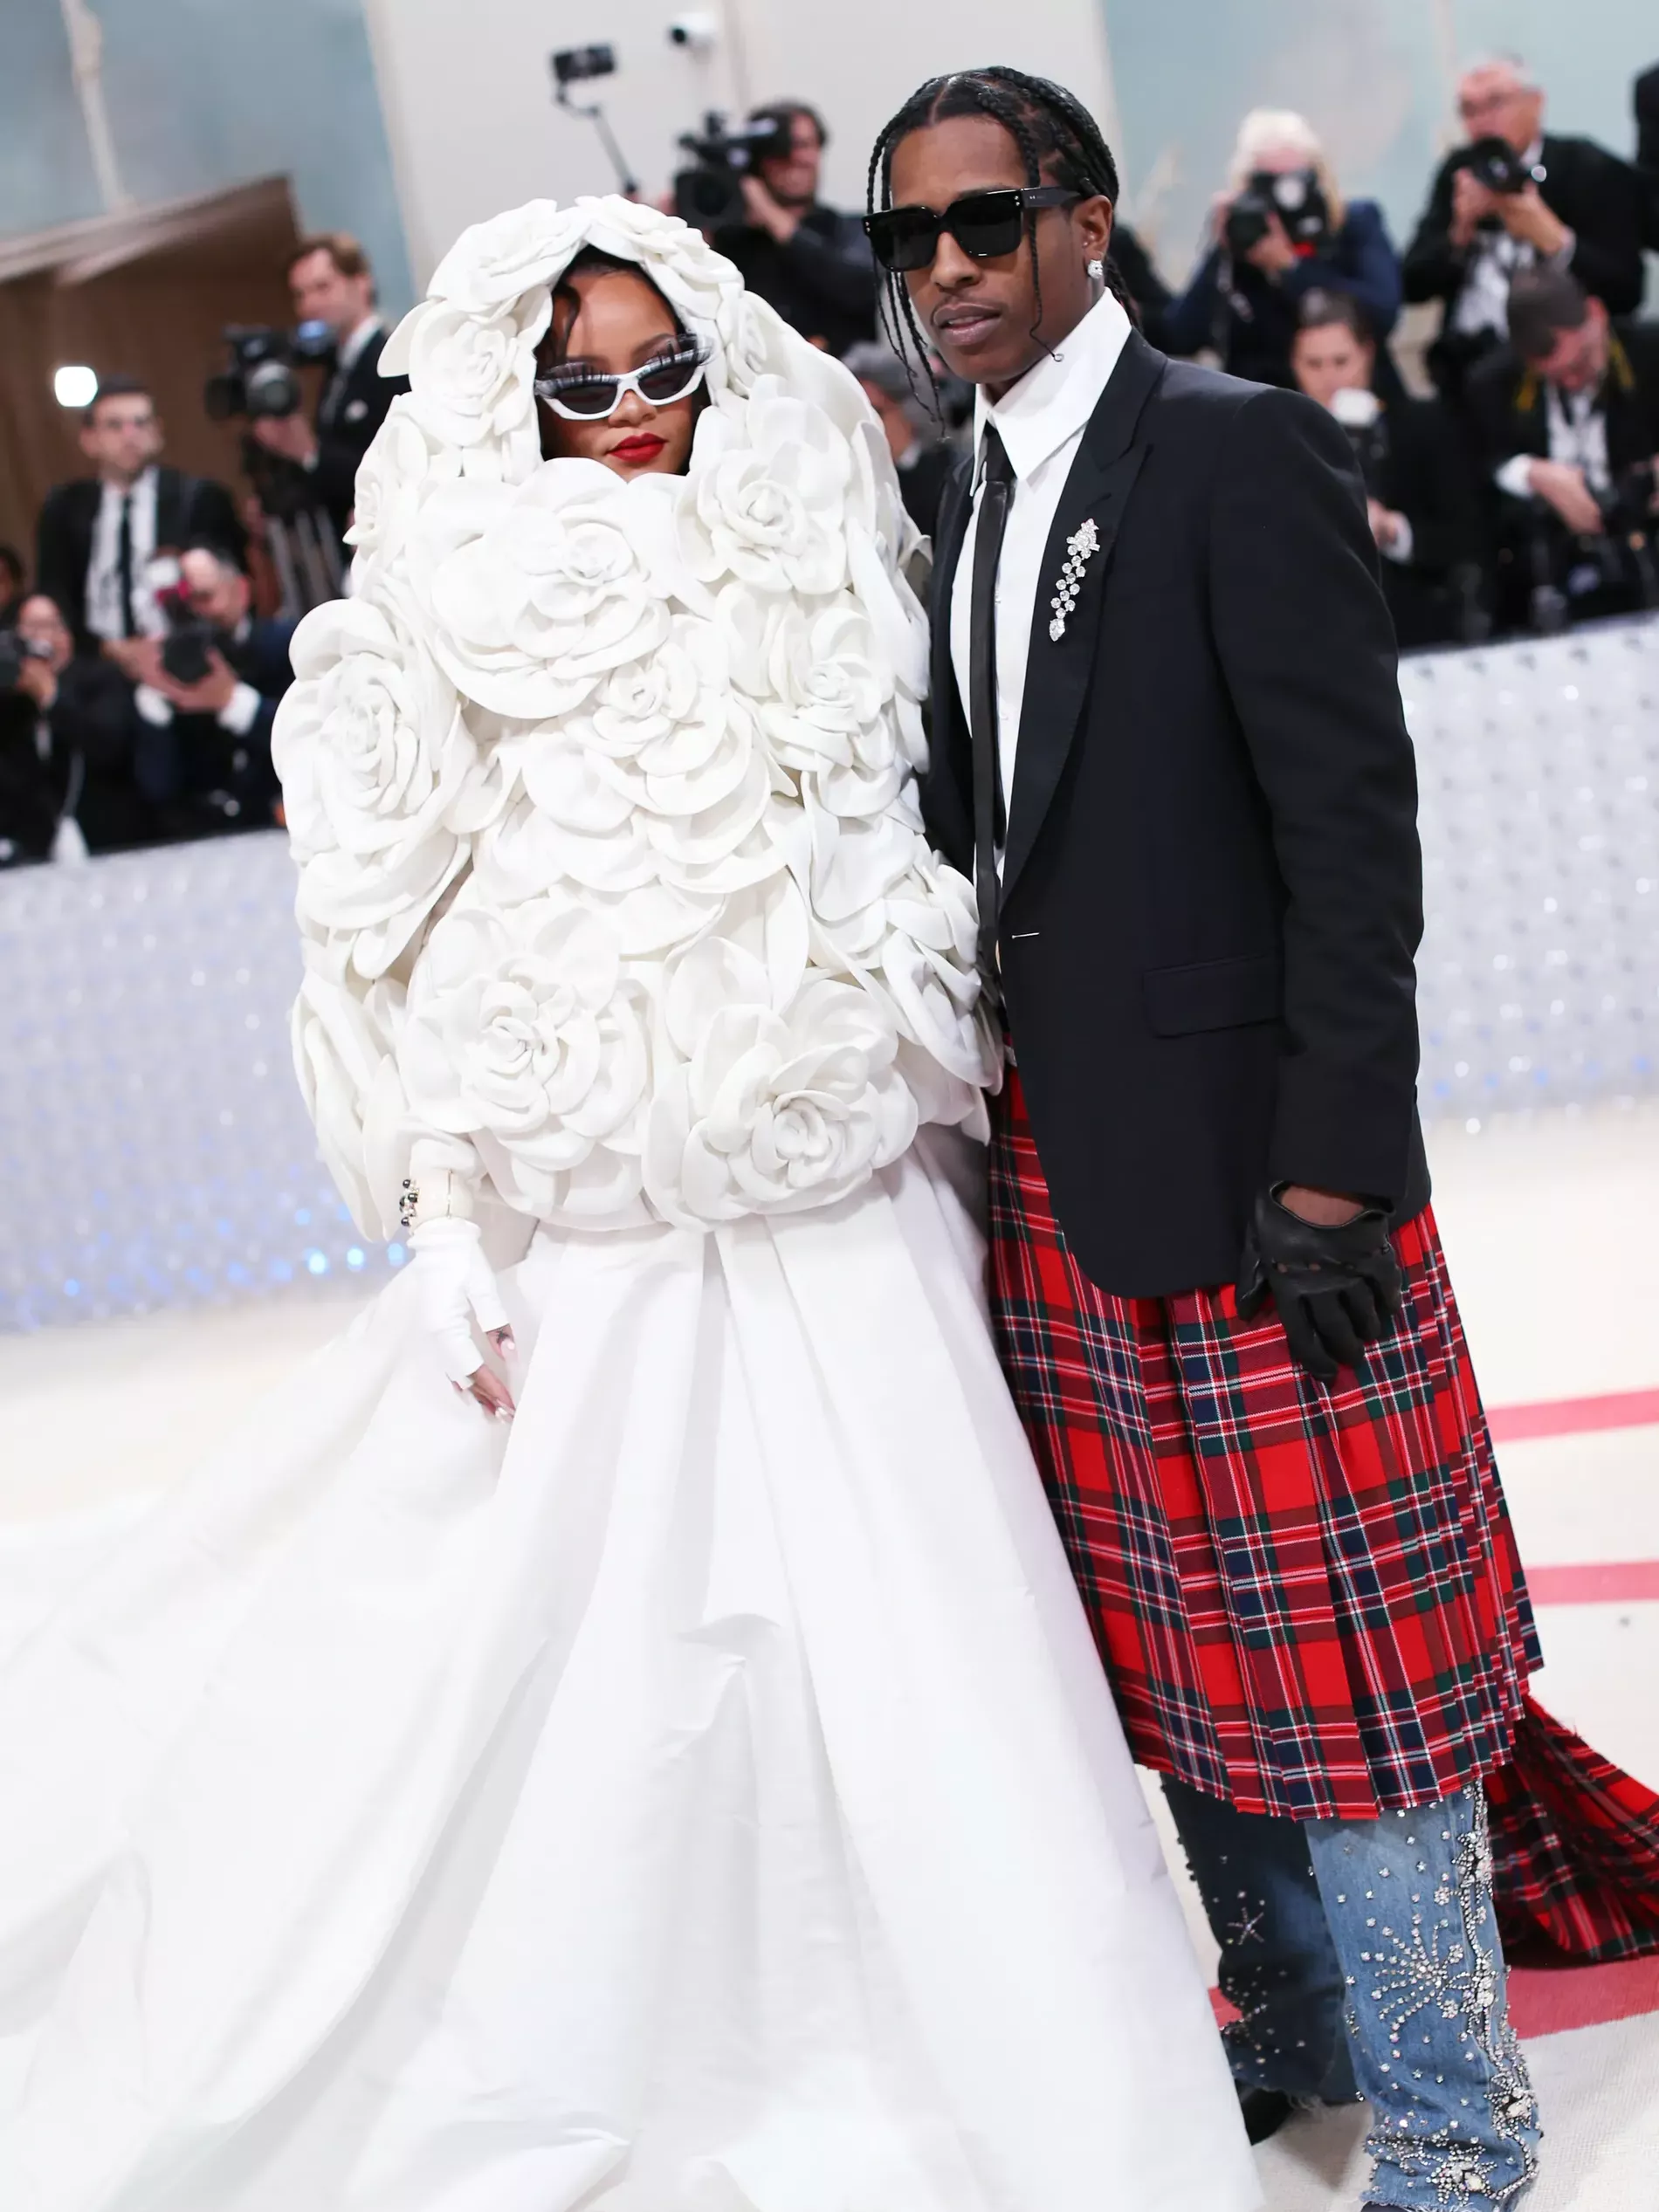 Best Met Gala couples throughout the years - Vogue Scandinavia